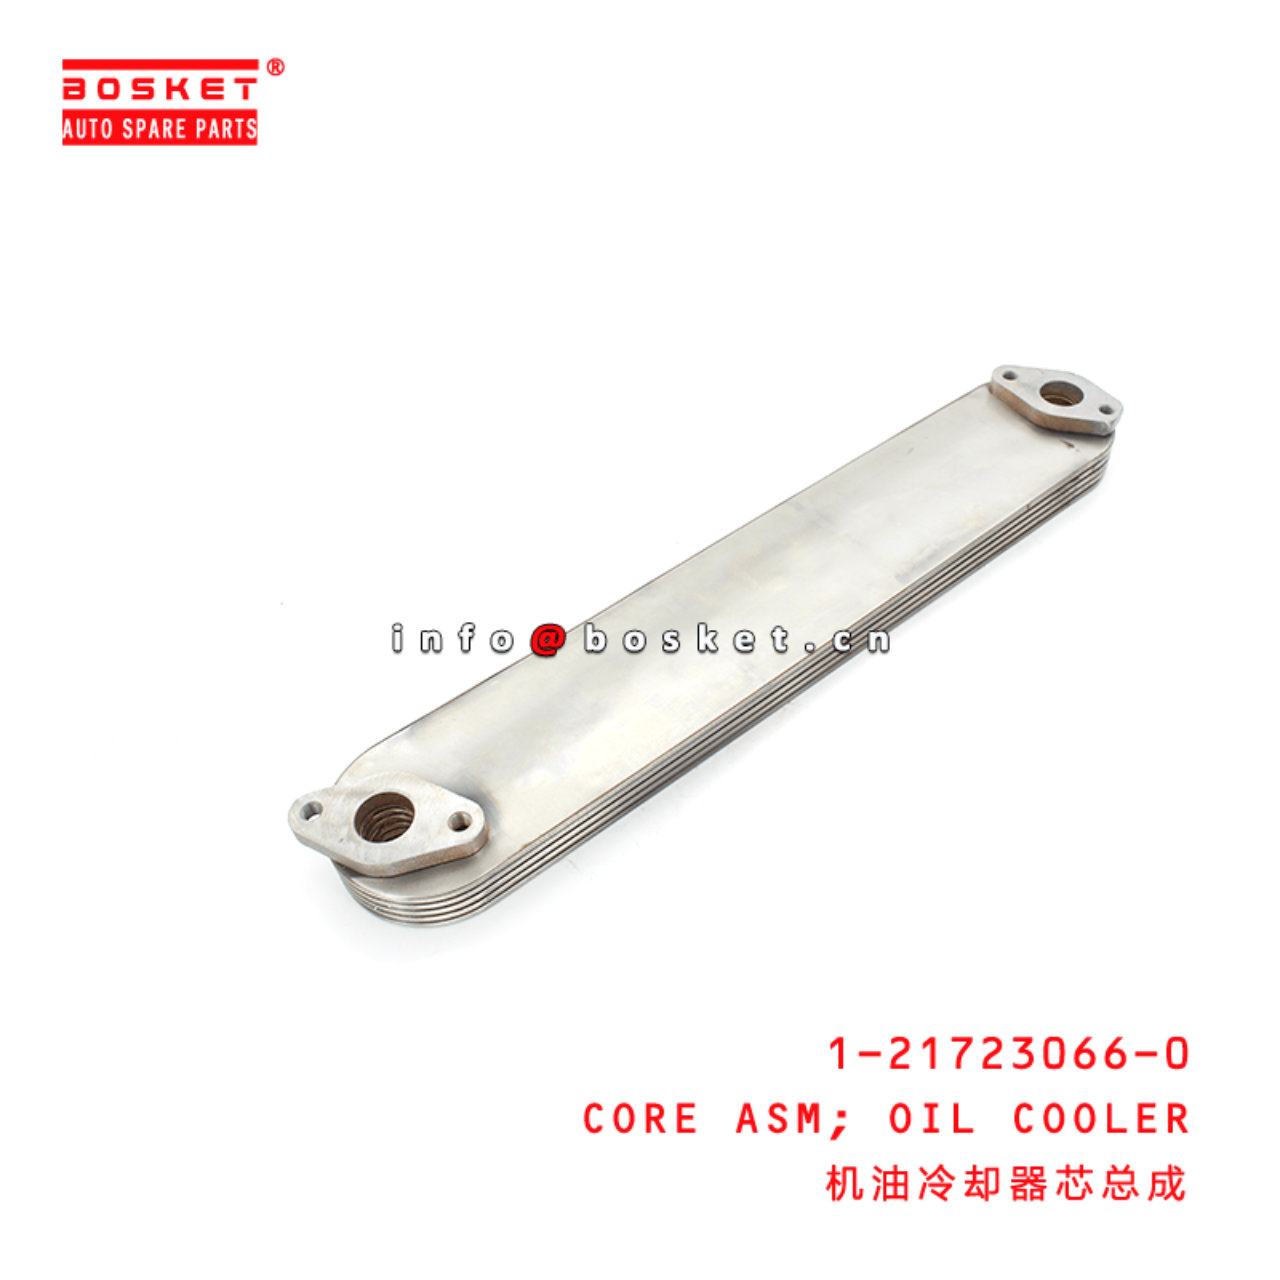  1-21723066-0 Oil Cooler Core Assembly 1217230660 Suitable for ISUZU XE 6HK1 